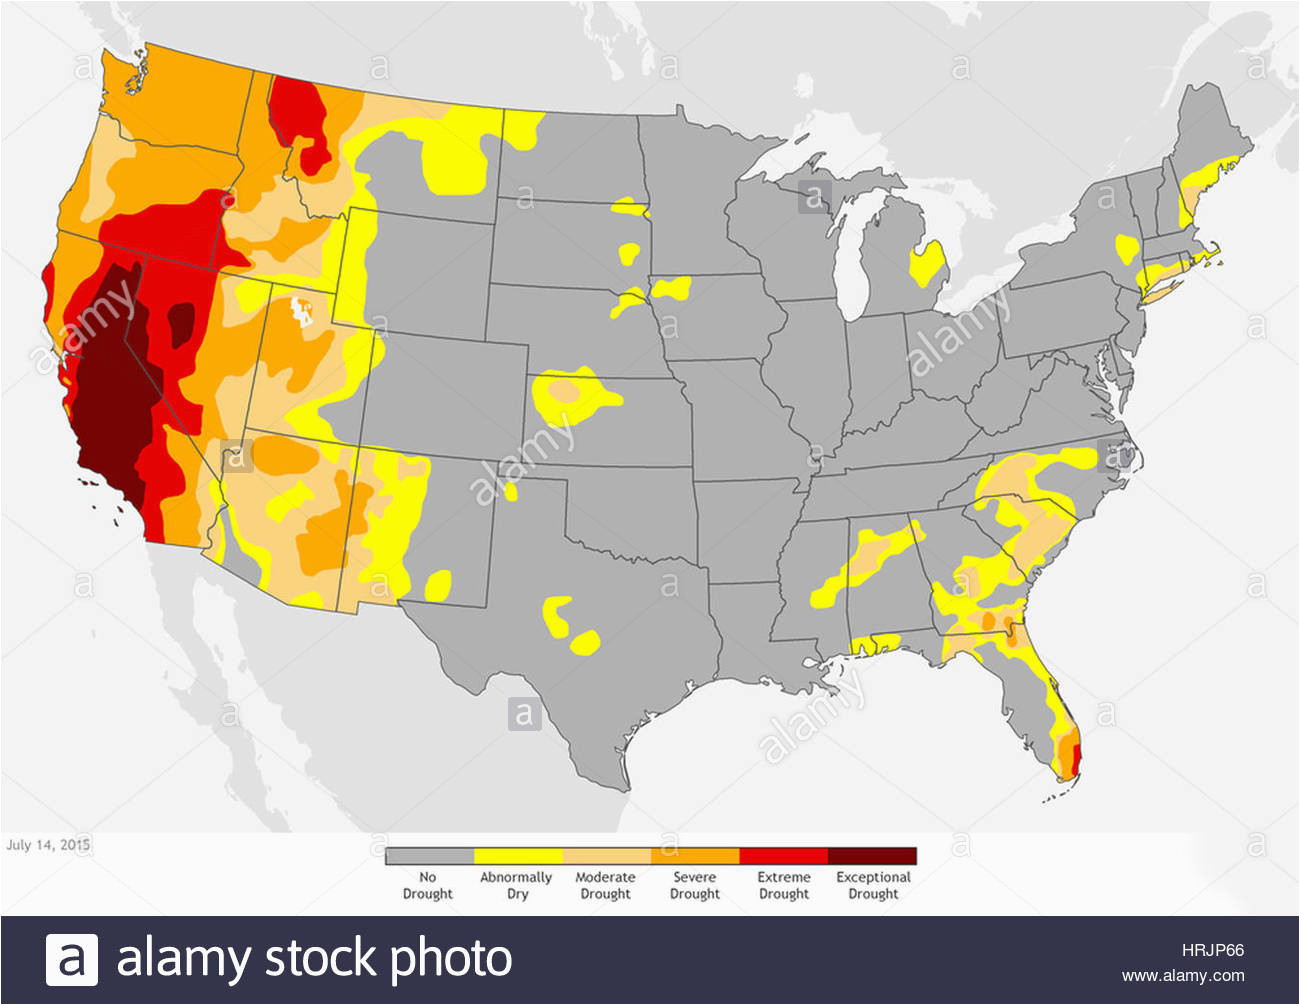 fire map stock photos fire map stock images alamy